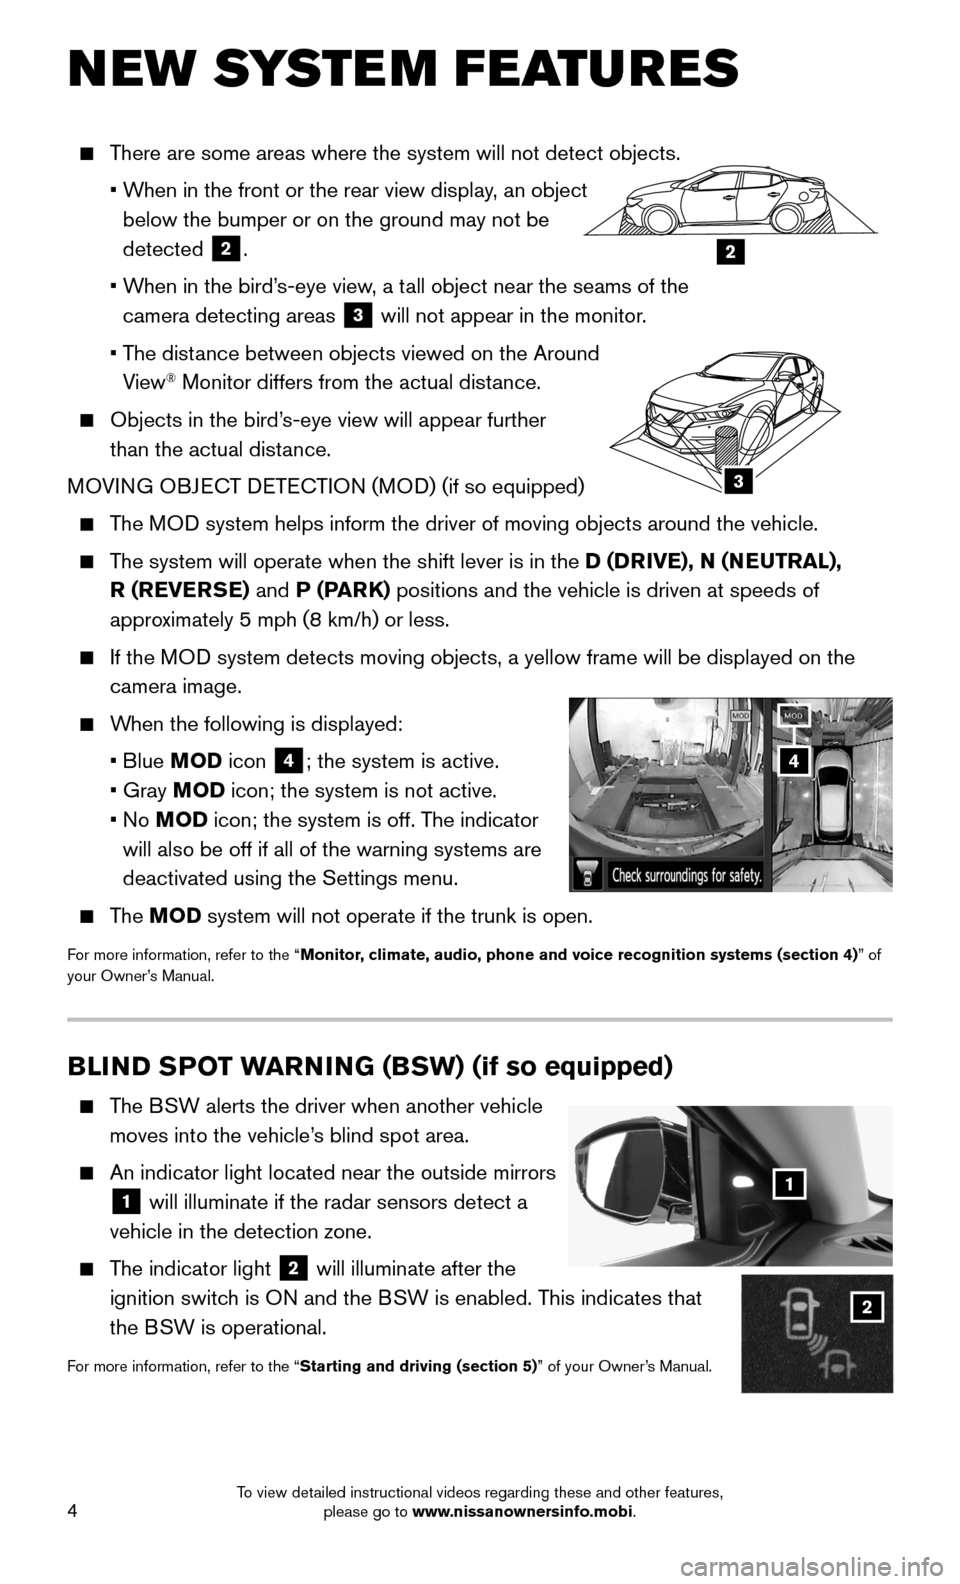 NISSAN MAXIMA 2016 A36 / 8.G Quick Reference Guide 4
BLIND SPOT WARNING (BSW) (if so equipped)
    The BSW alerts the driver when another vehicle 
moves into the vehicle’s blind spot area.
    An indicator light located near the outside mirrors 
1 w